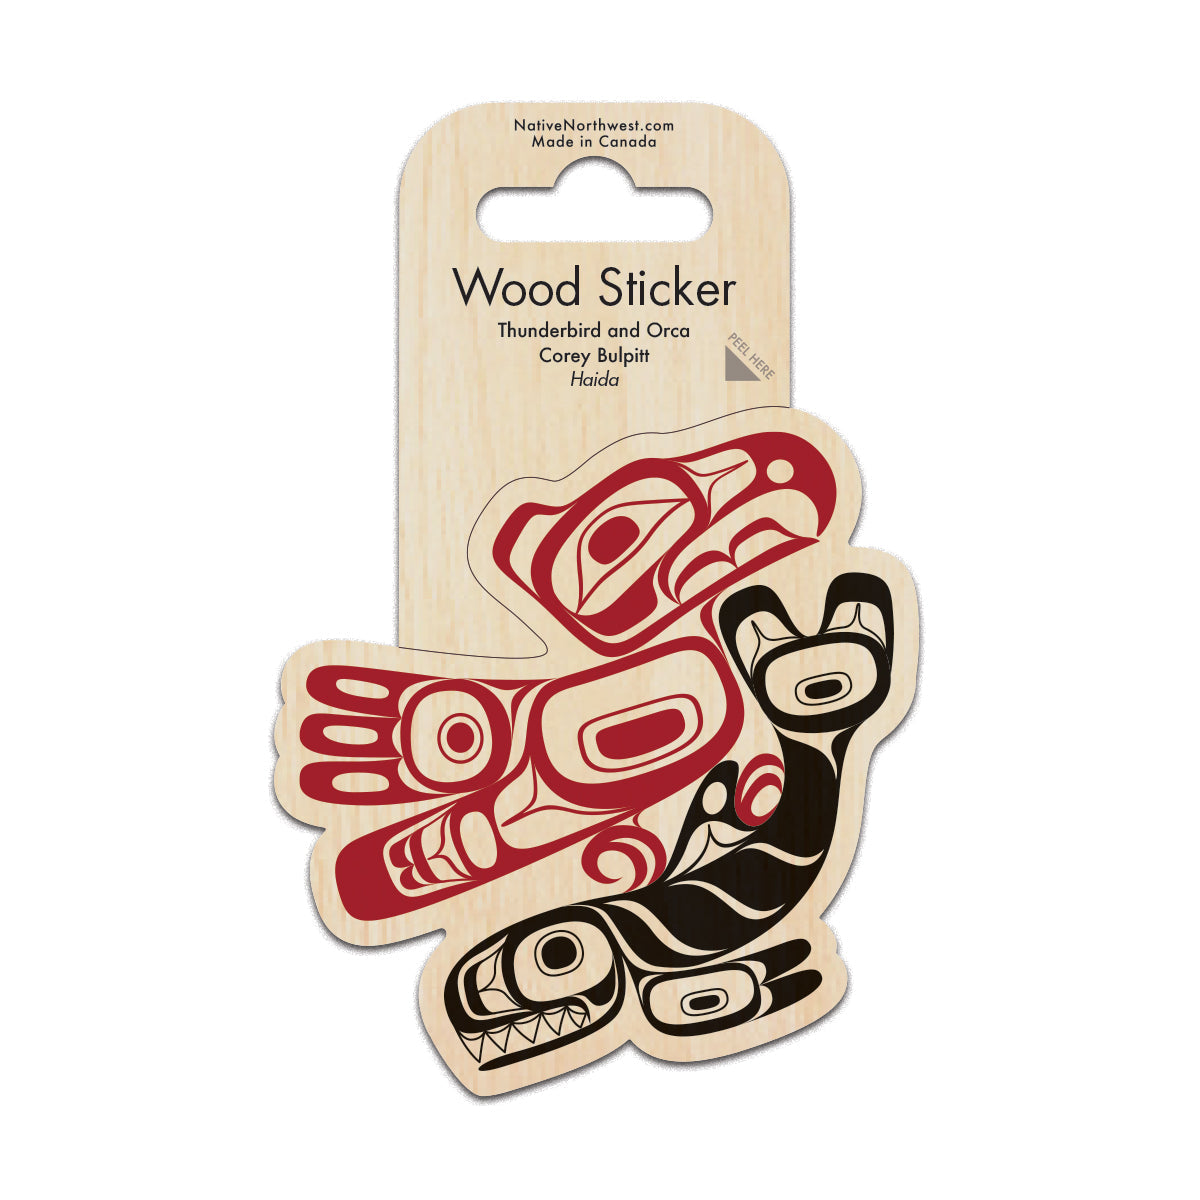 Wood Sticker Thunder bird and Orca - Wood Sticker Thunder bird and Orca -  - House of Himwitsa Native Art Gallery and Gifts